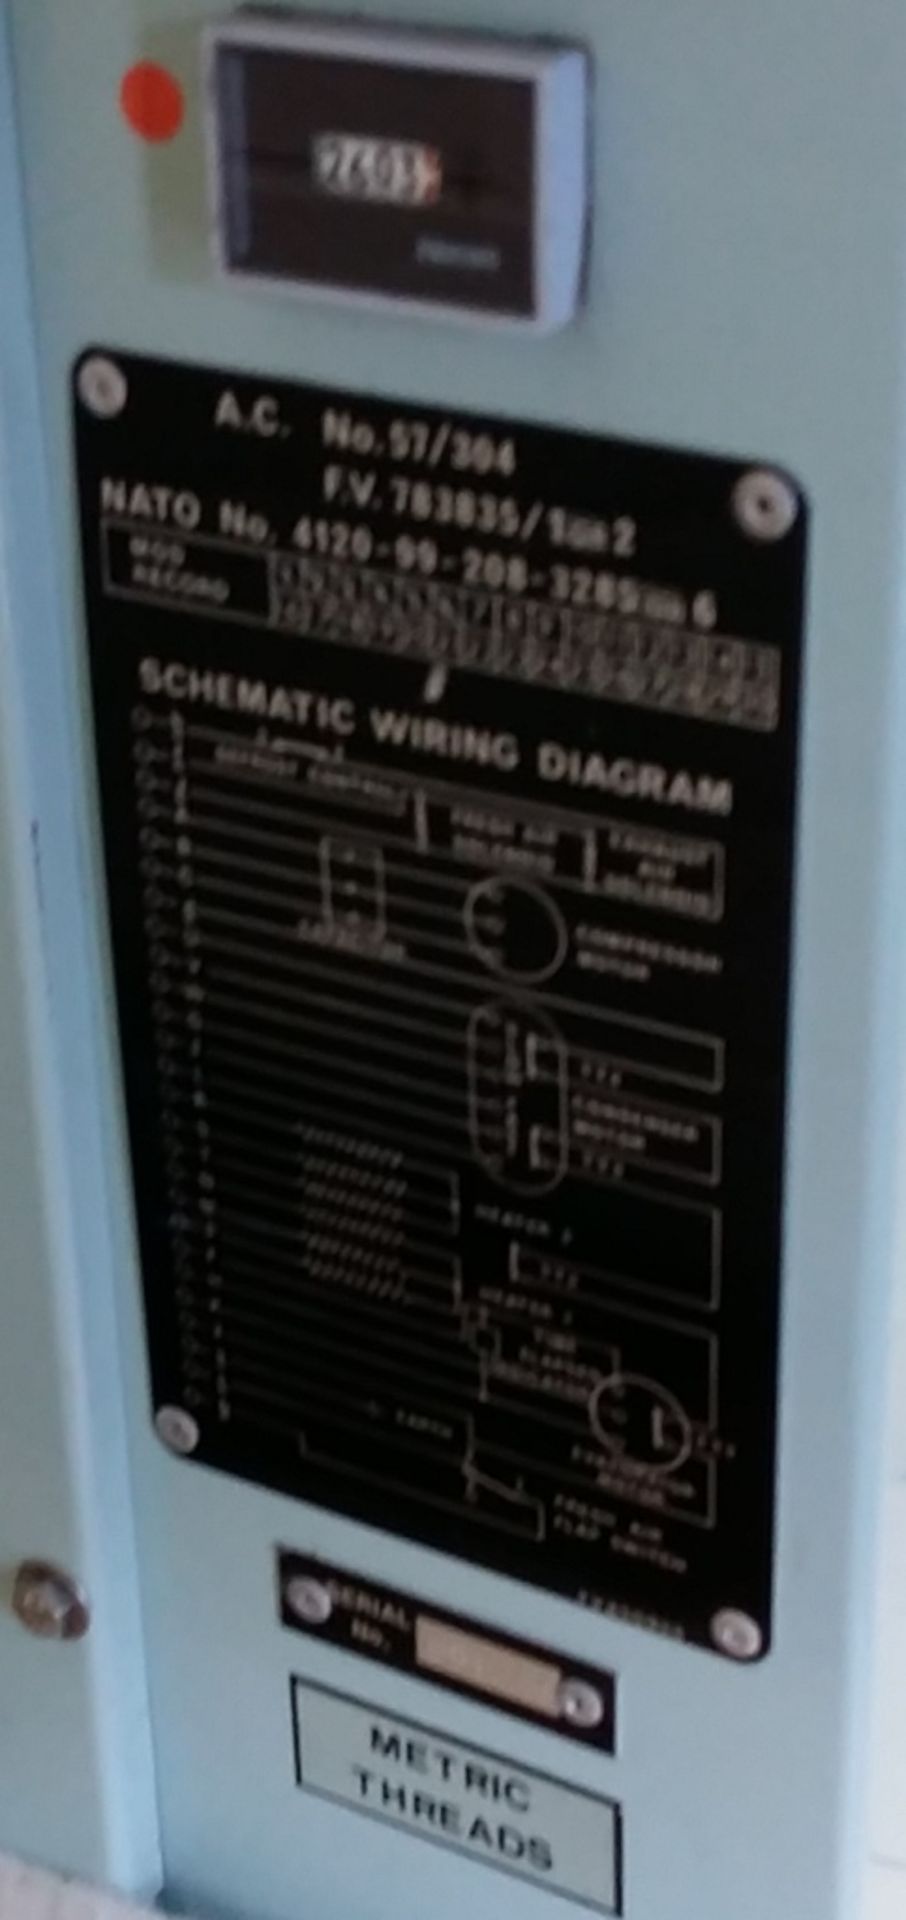 Air conditioning unit - AC No. 57/203 - NSN 4120-99-208-3288 - FV 783836/2 - Image 2 of 2